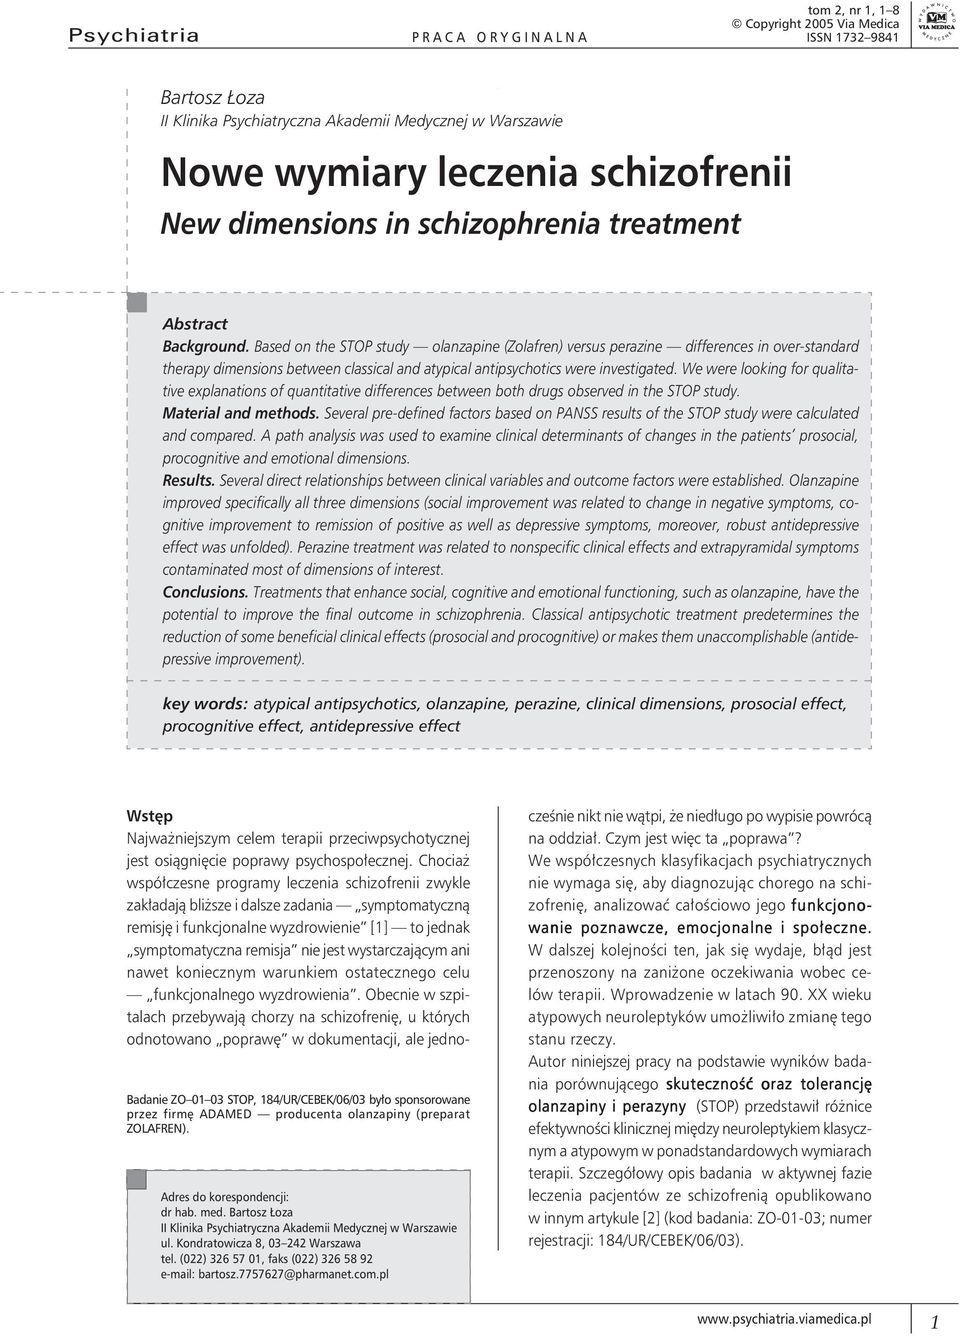 Based on the STOP study olanzapine (Zolafren) versus perazine differences in over-standard therapy dimensions between classical and atypical antipsychotics were investigated.